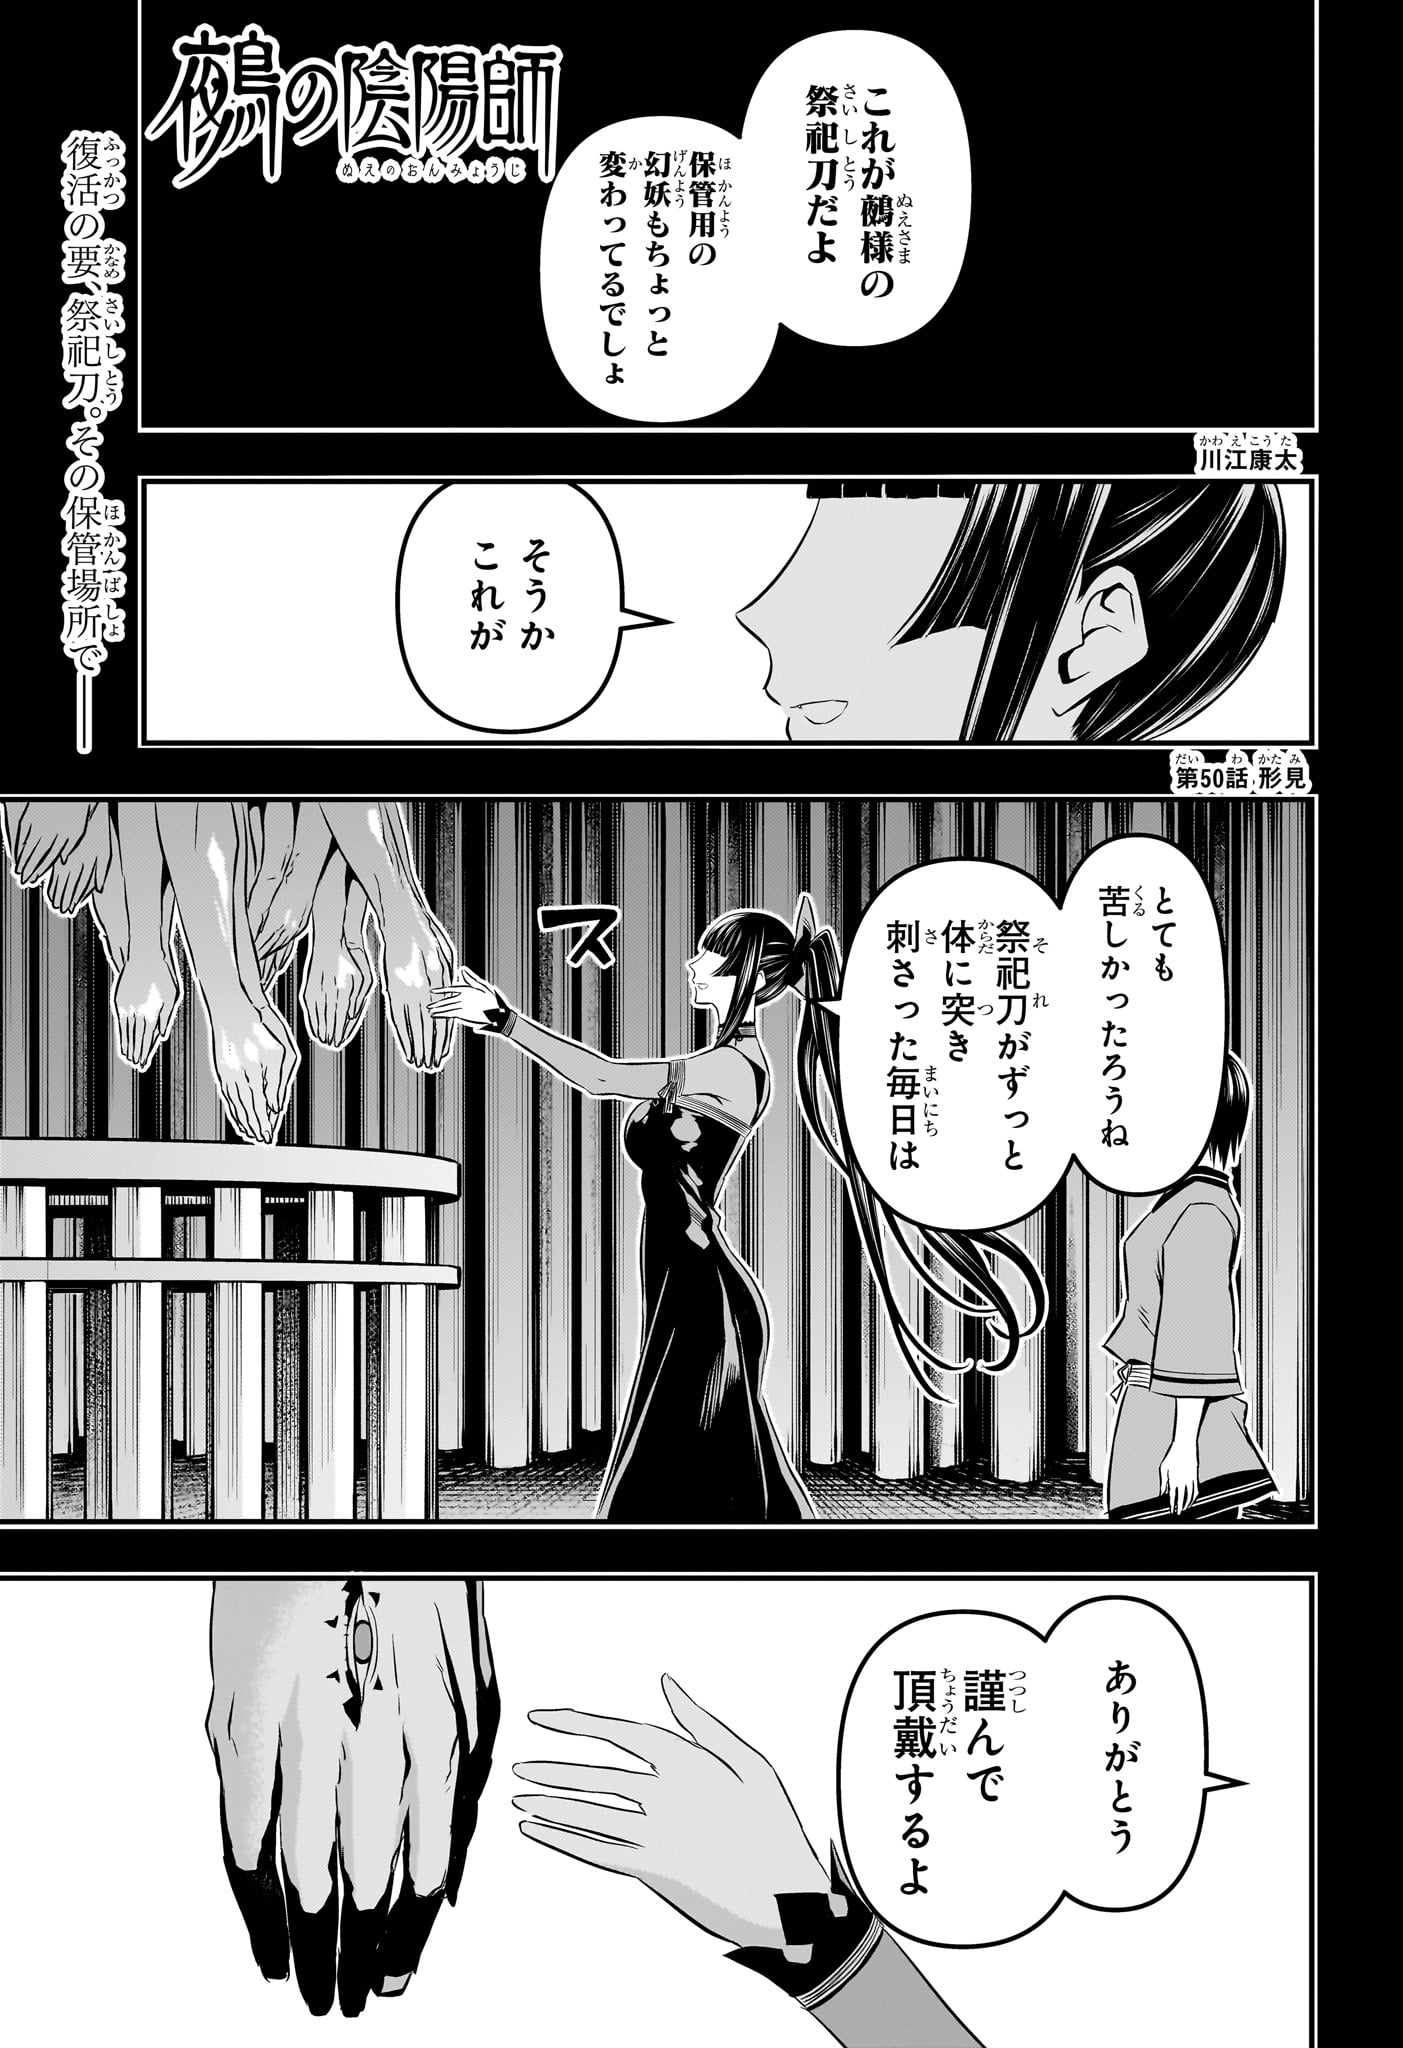 Nue no Onmyouji - Chapter 50 - Page 1